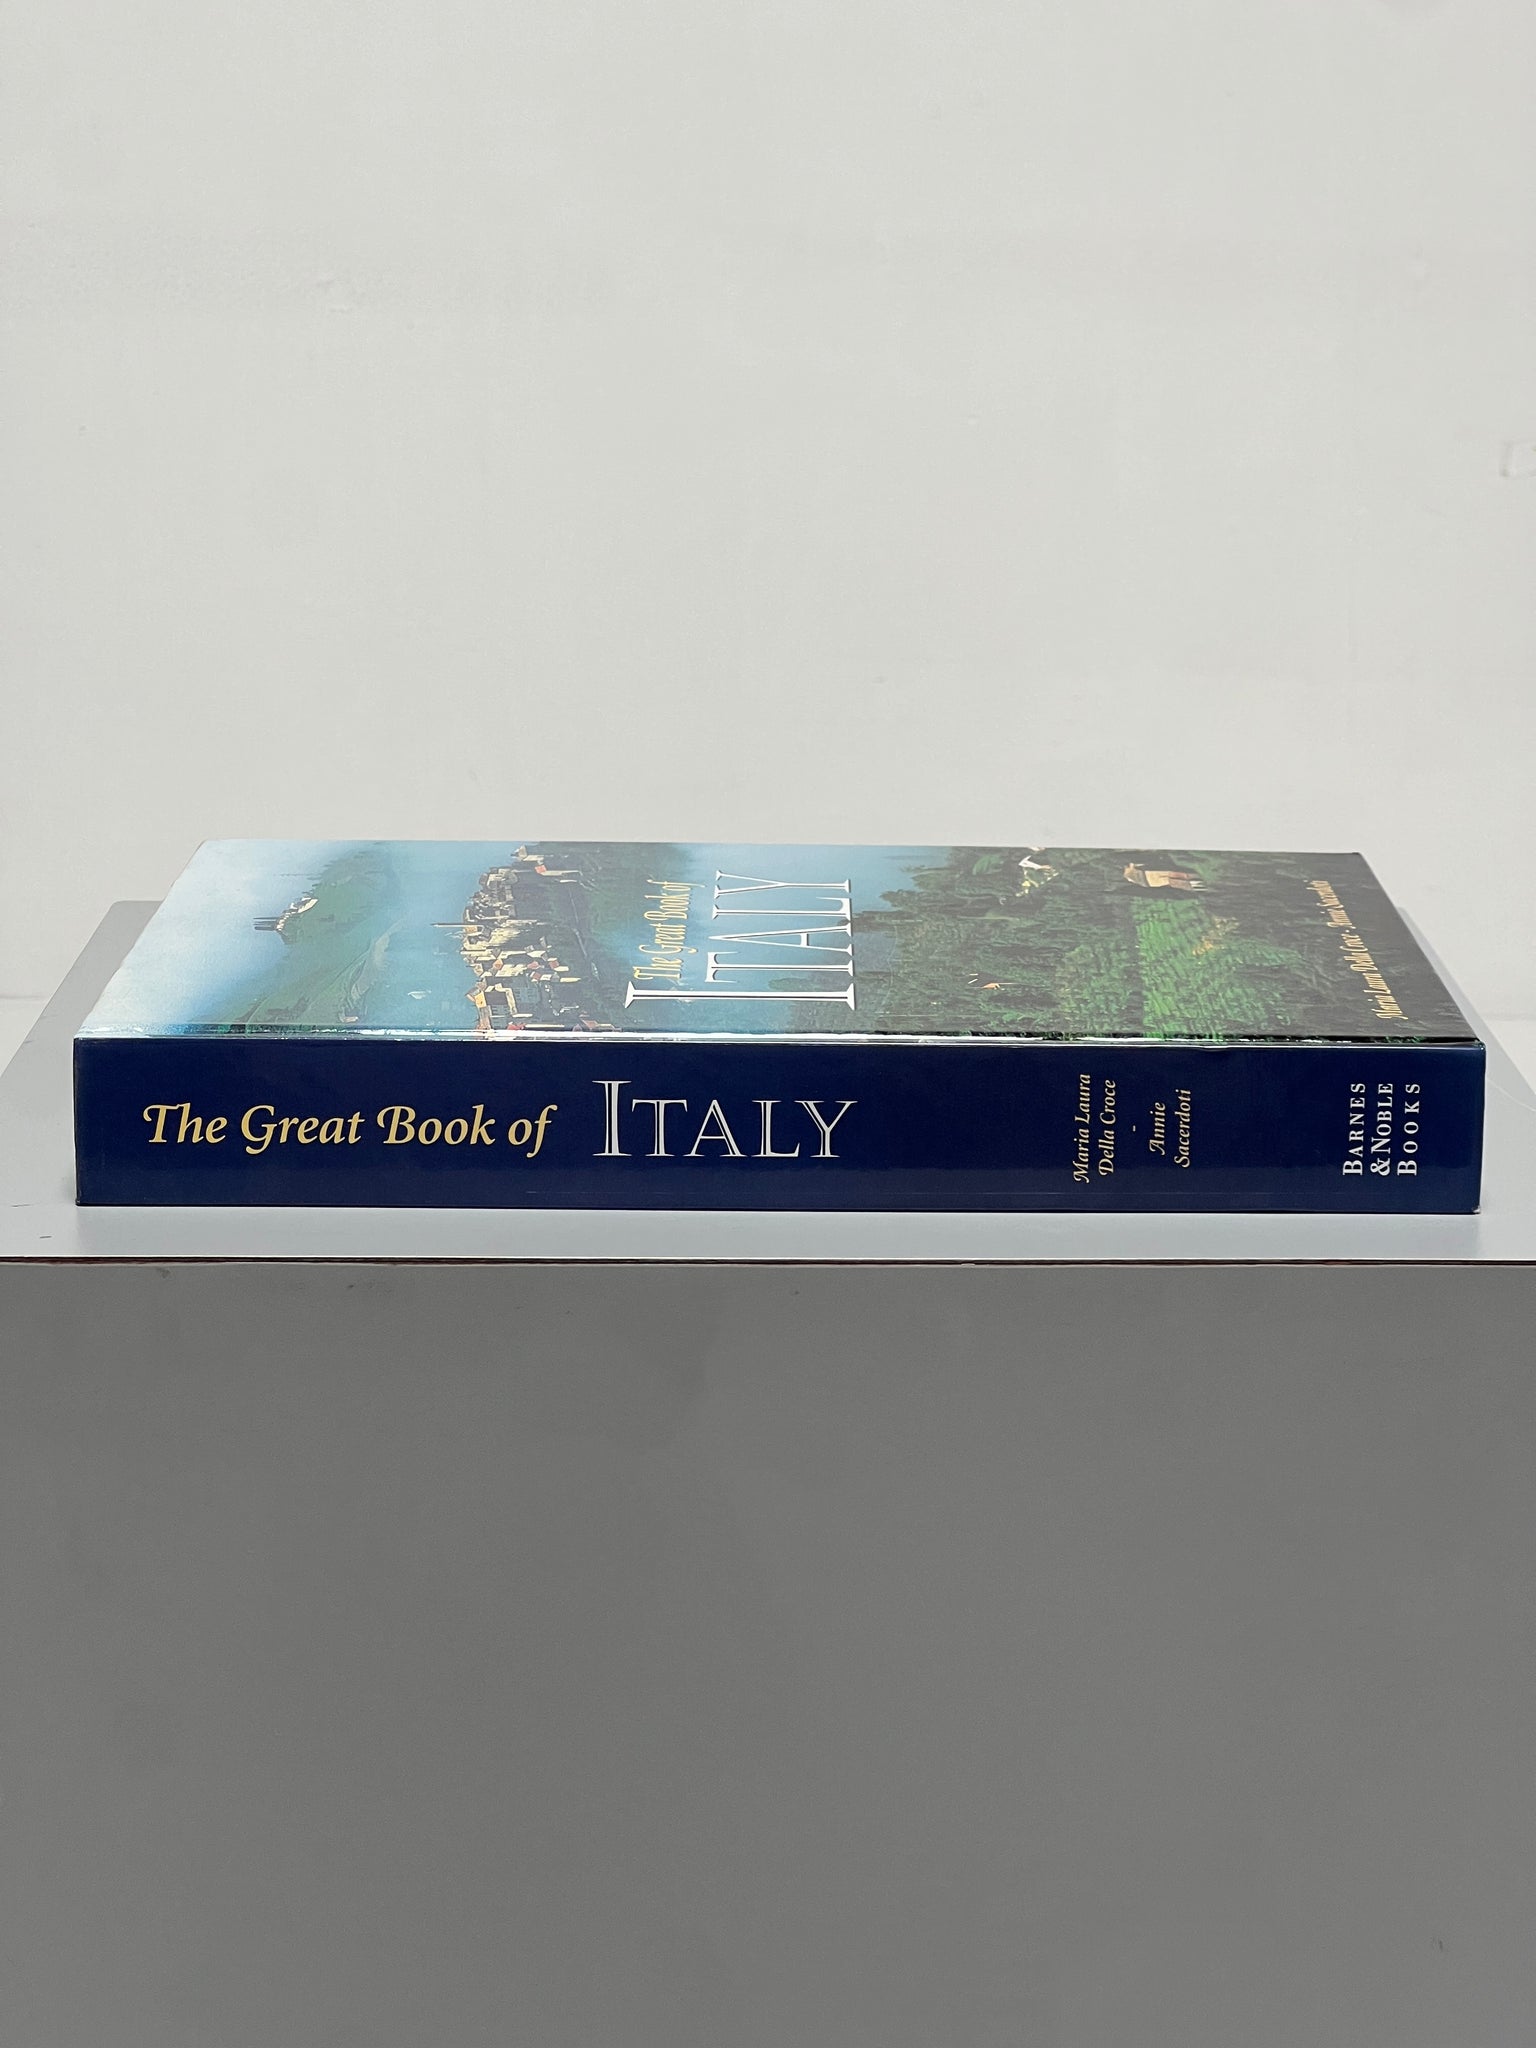 The Great Book of Italy, 2004